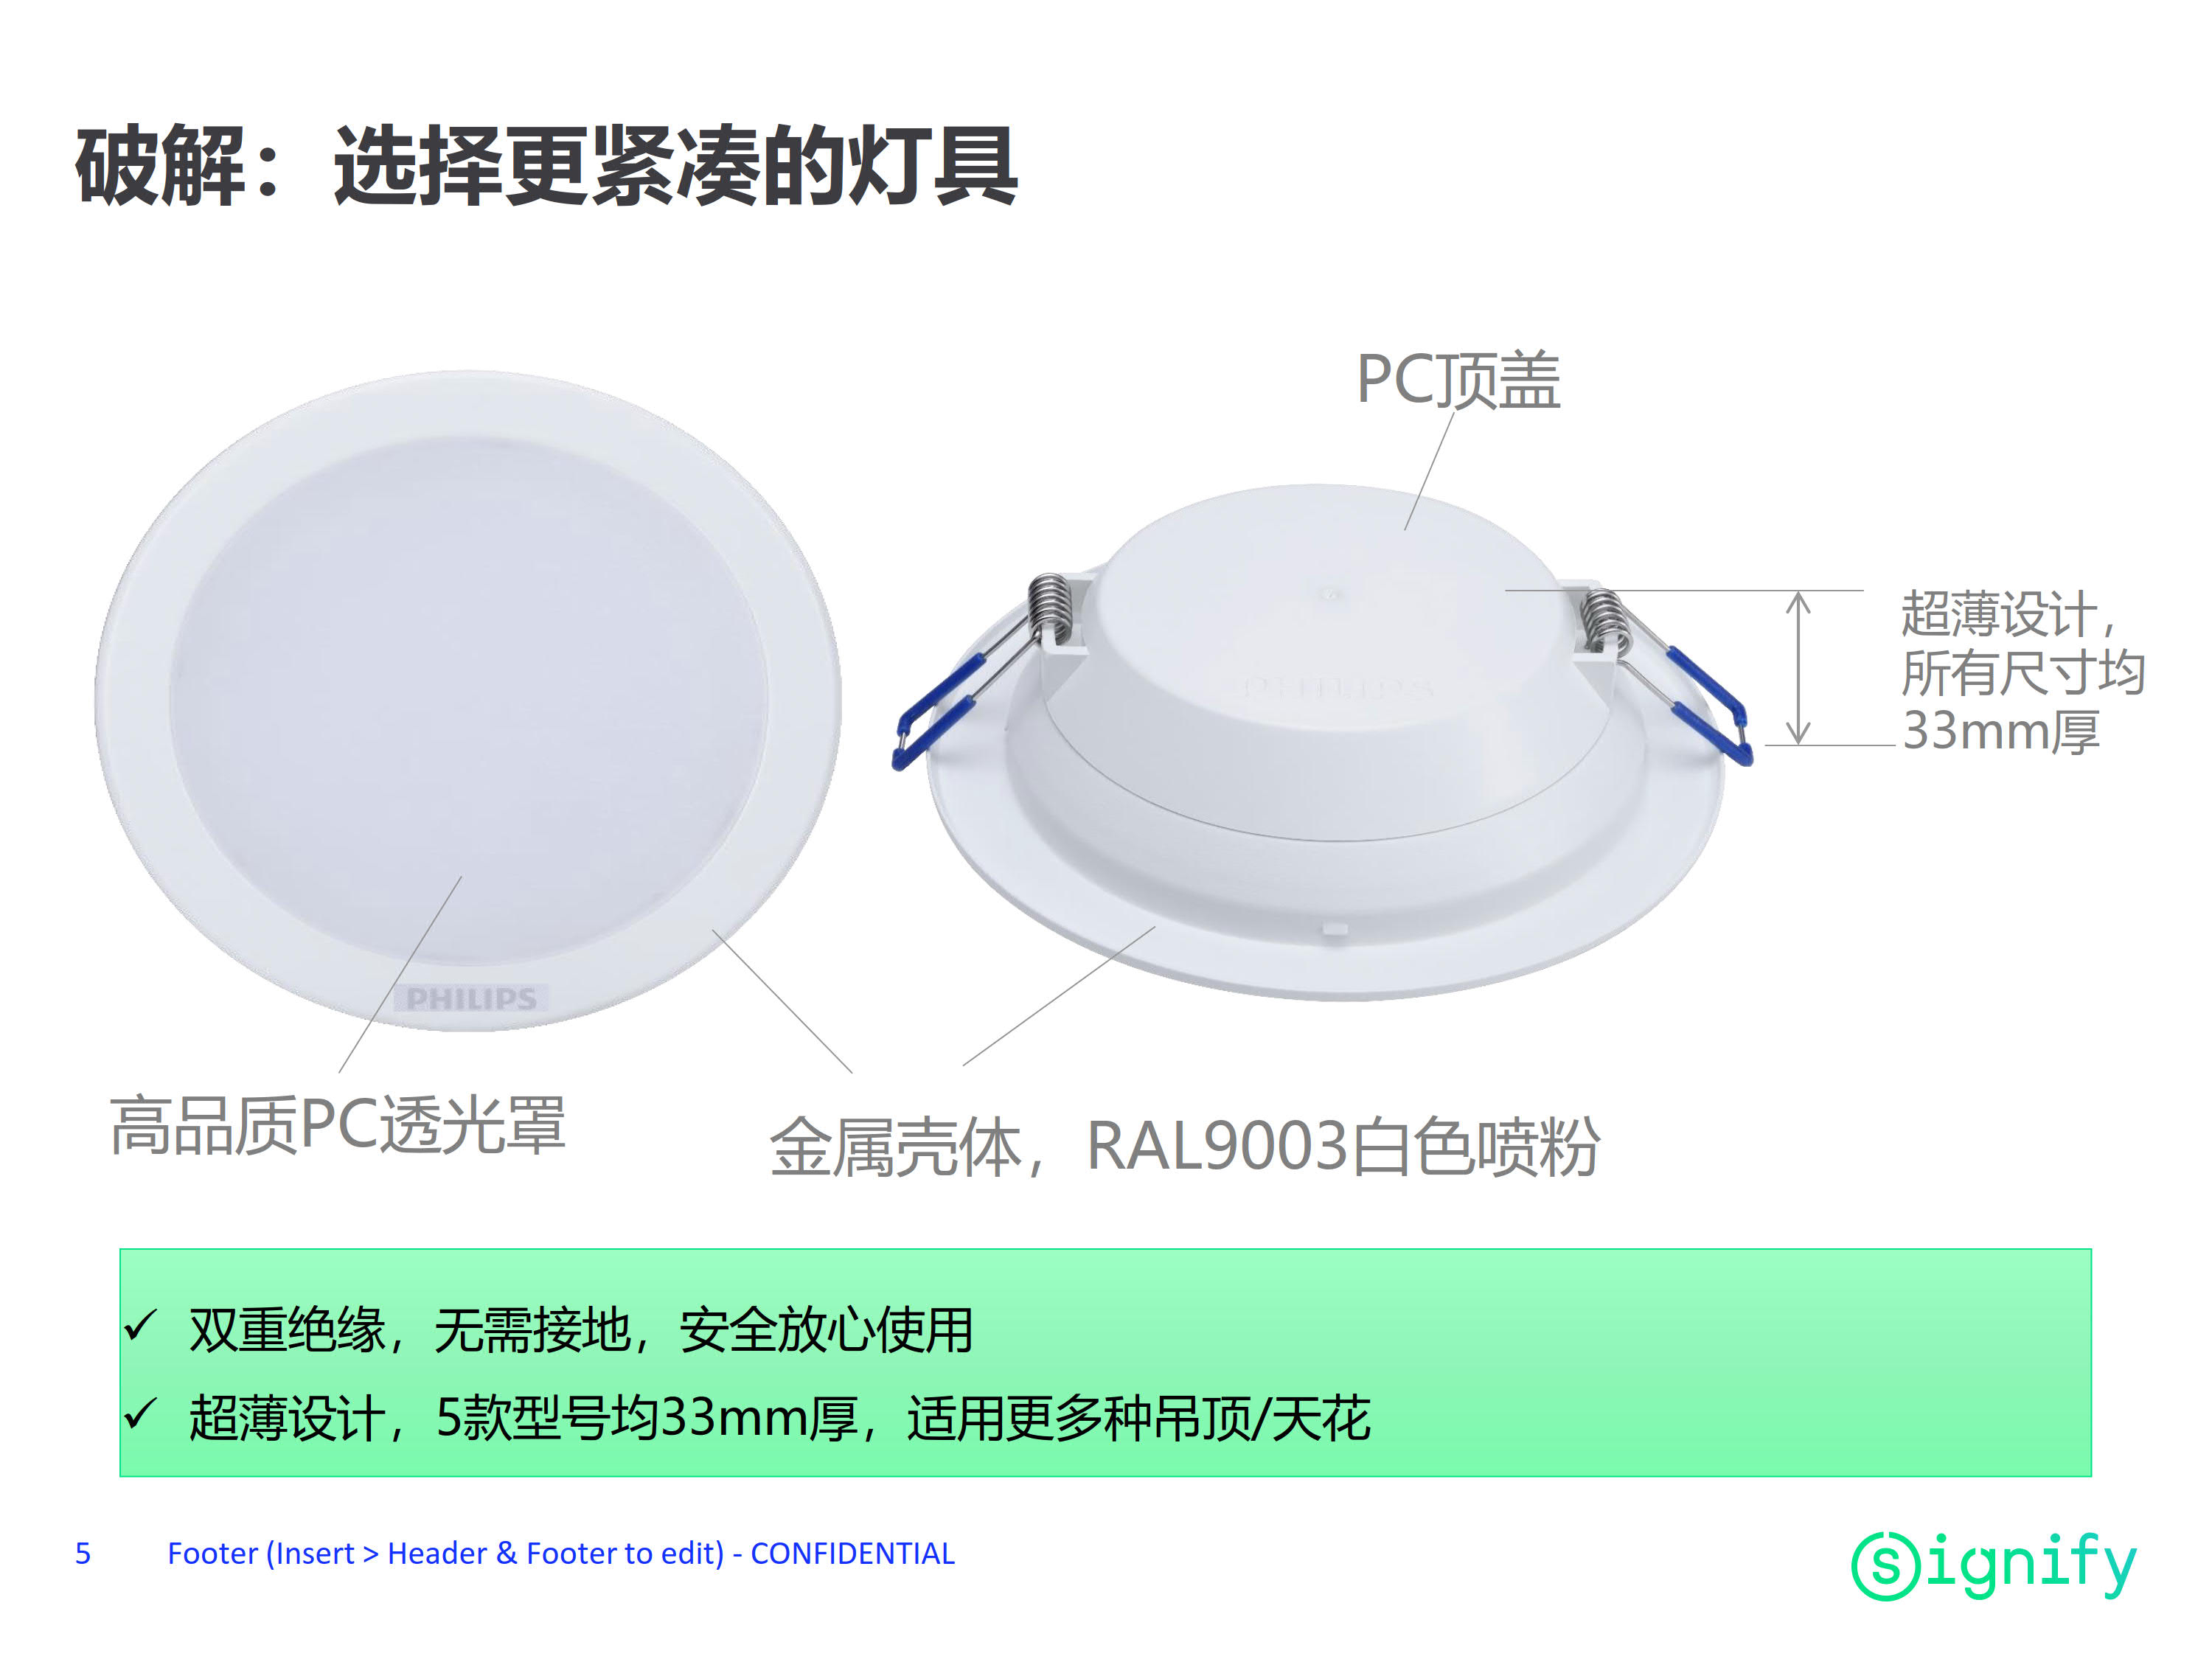 PHILIPS LED surface downlight DN003C LED10/CW 12W 220-240V D175 CN 929001970410